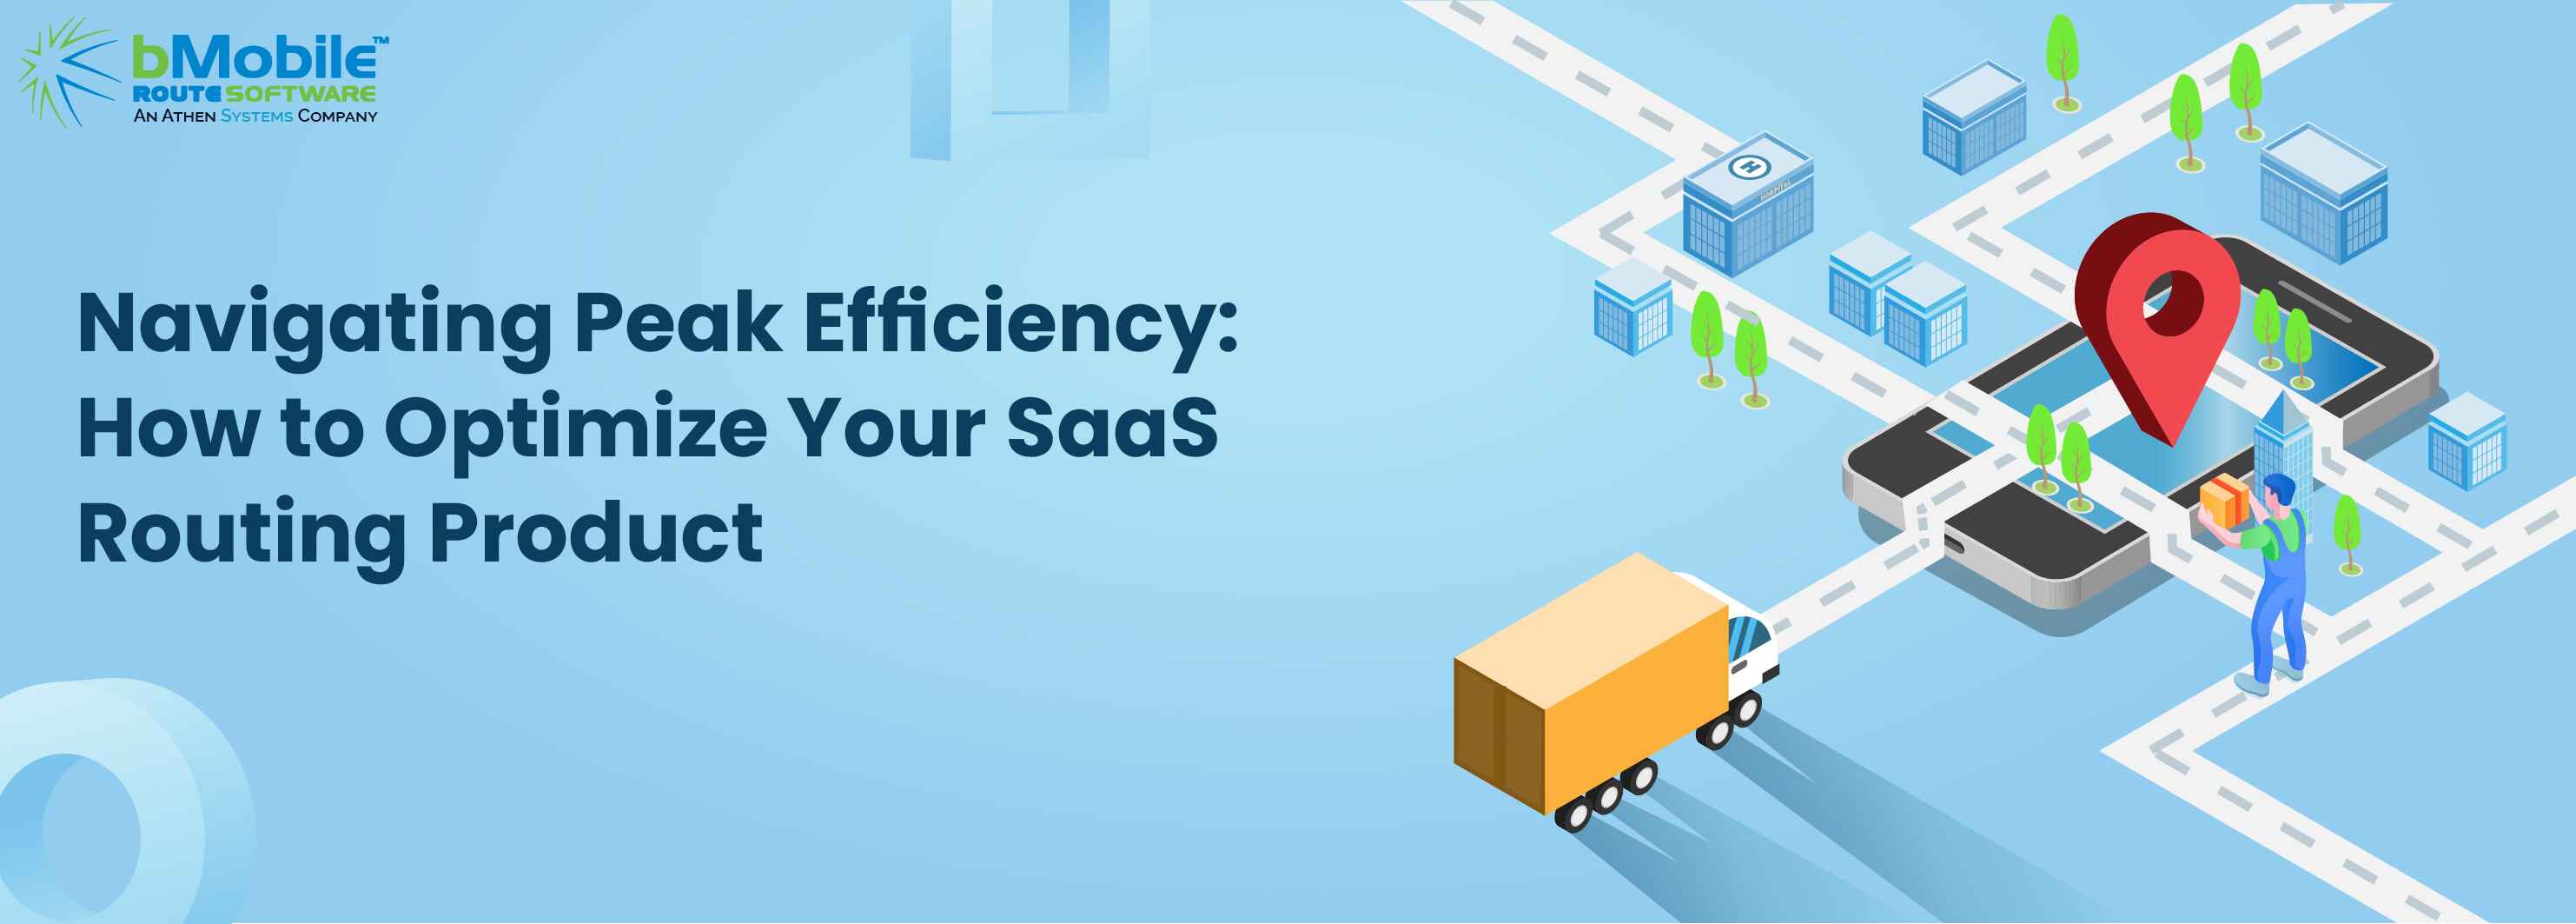 Navigating-Peak-Efficiency_how-to-optimize-your-SaaS-Routing-Product